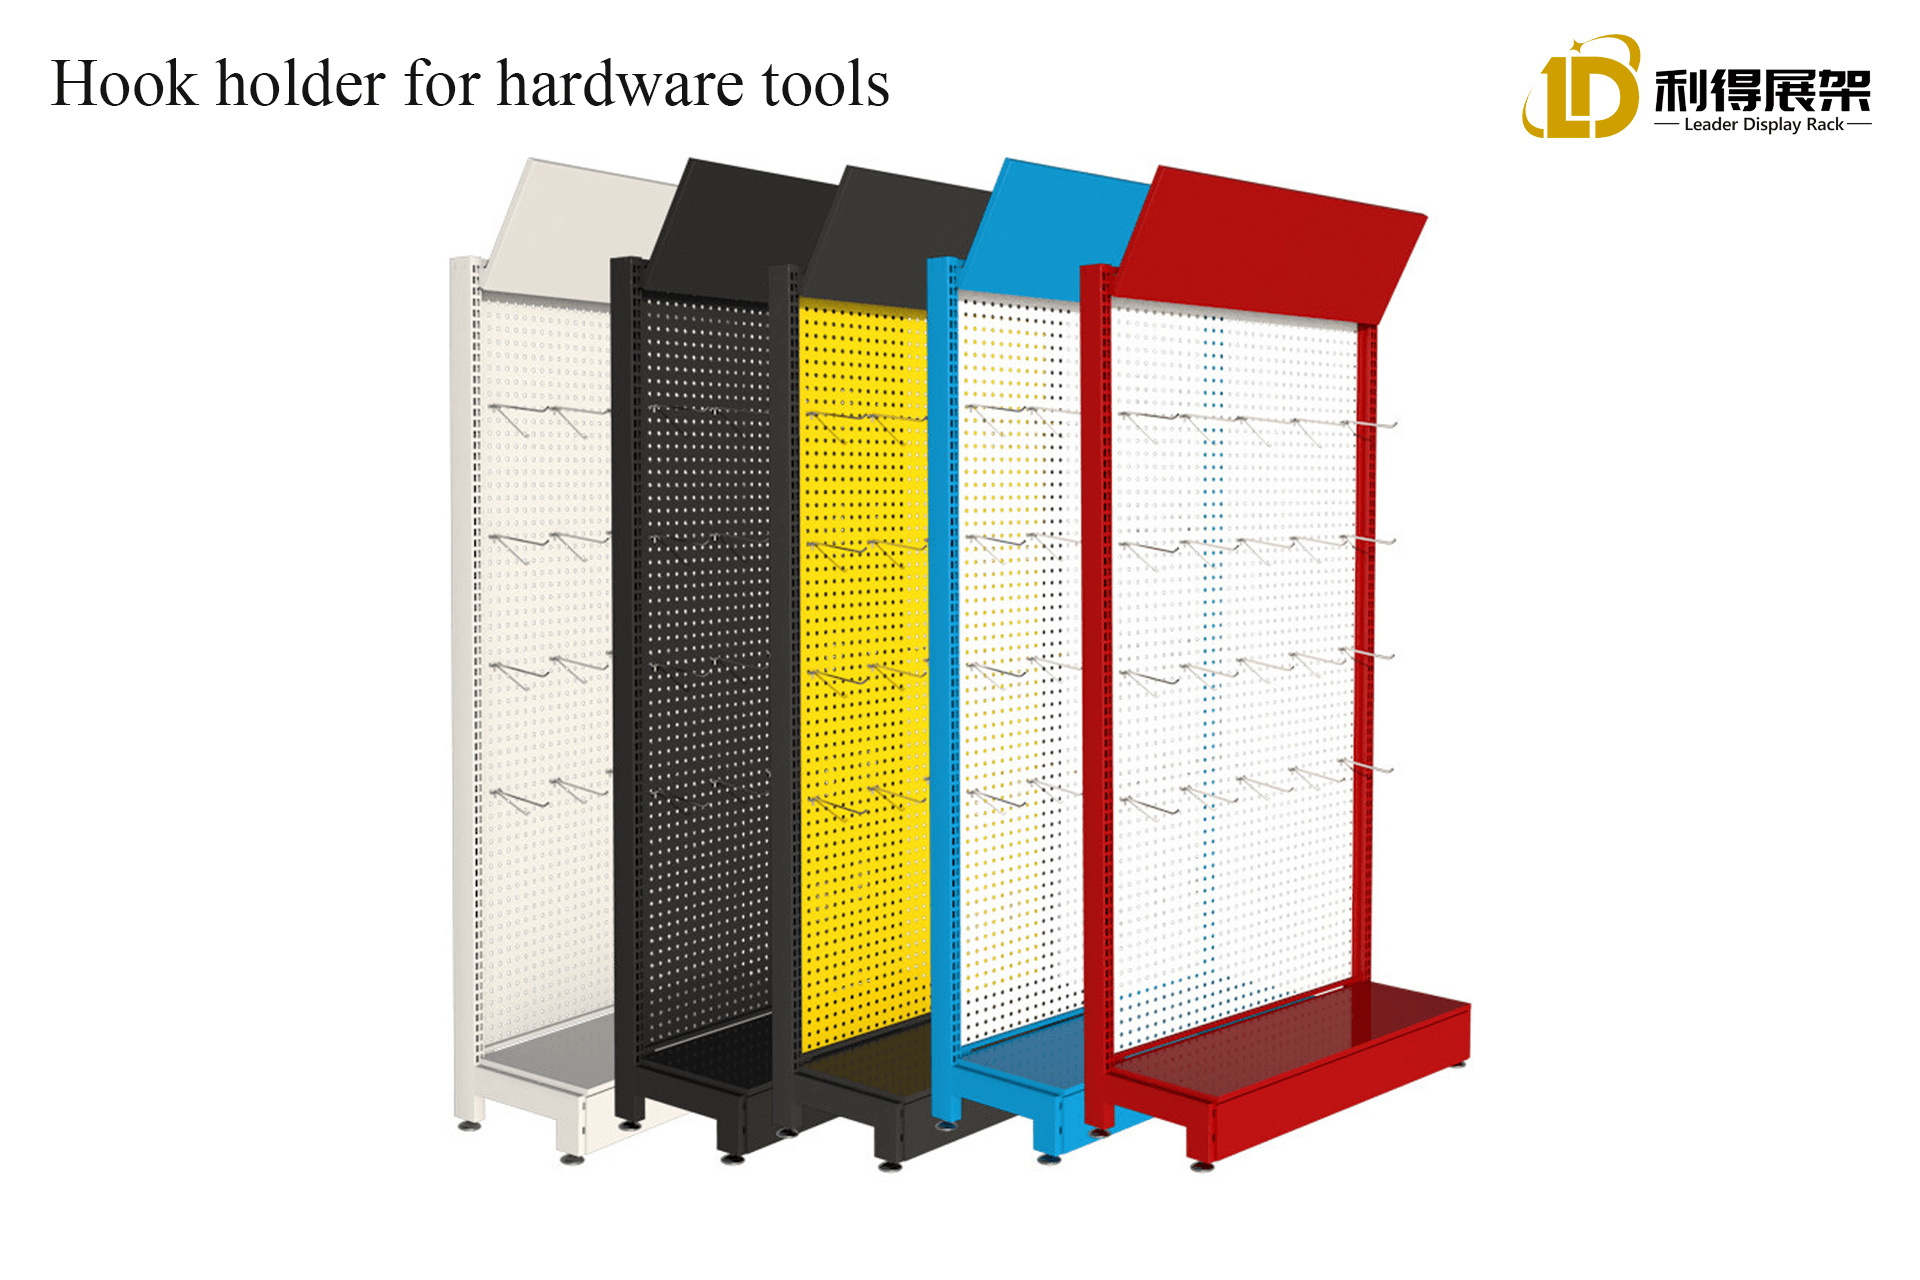 Hardware Tool Hanger, The Secret Weapon To Create A Sophisticated Workplace